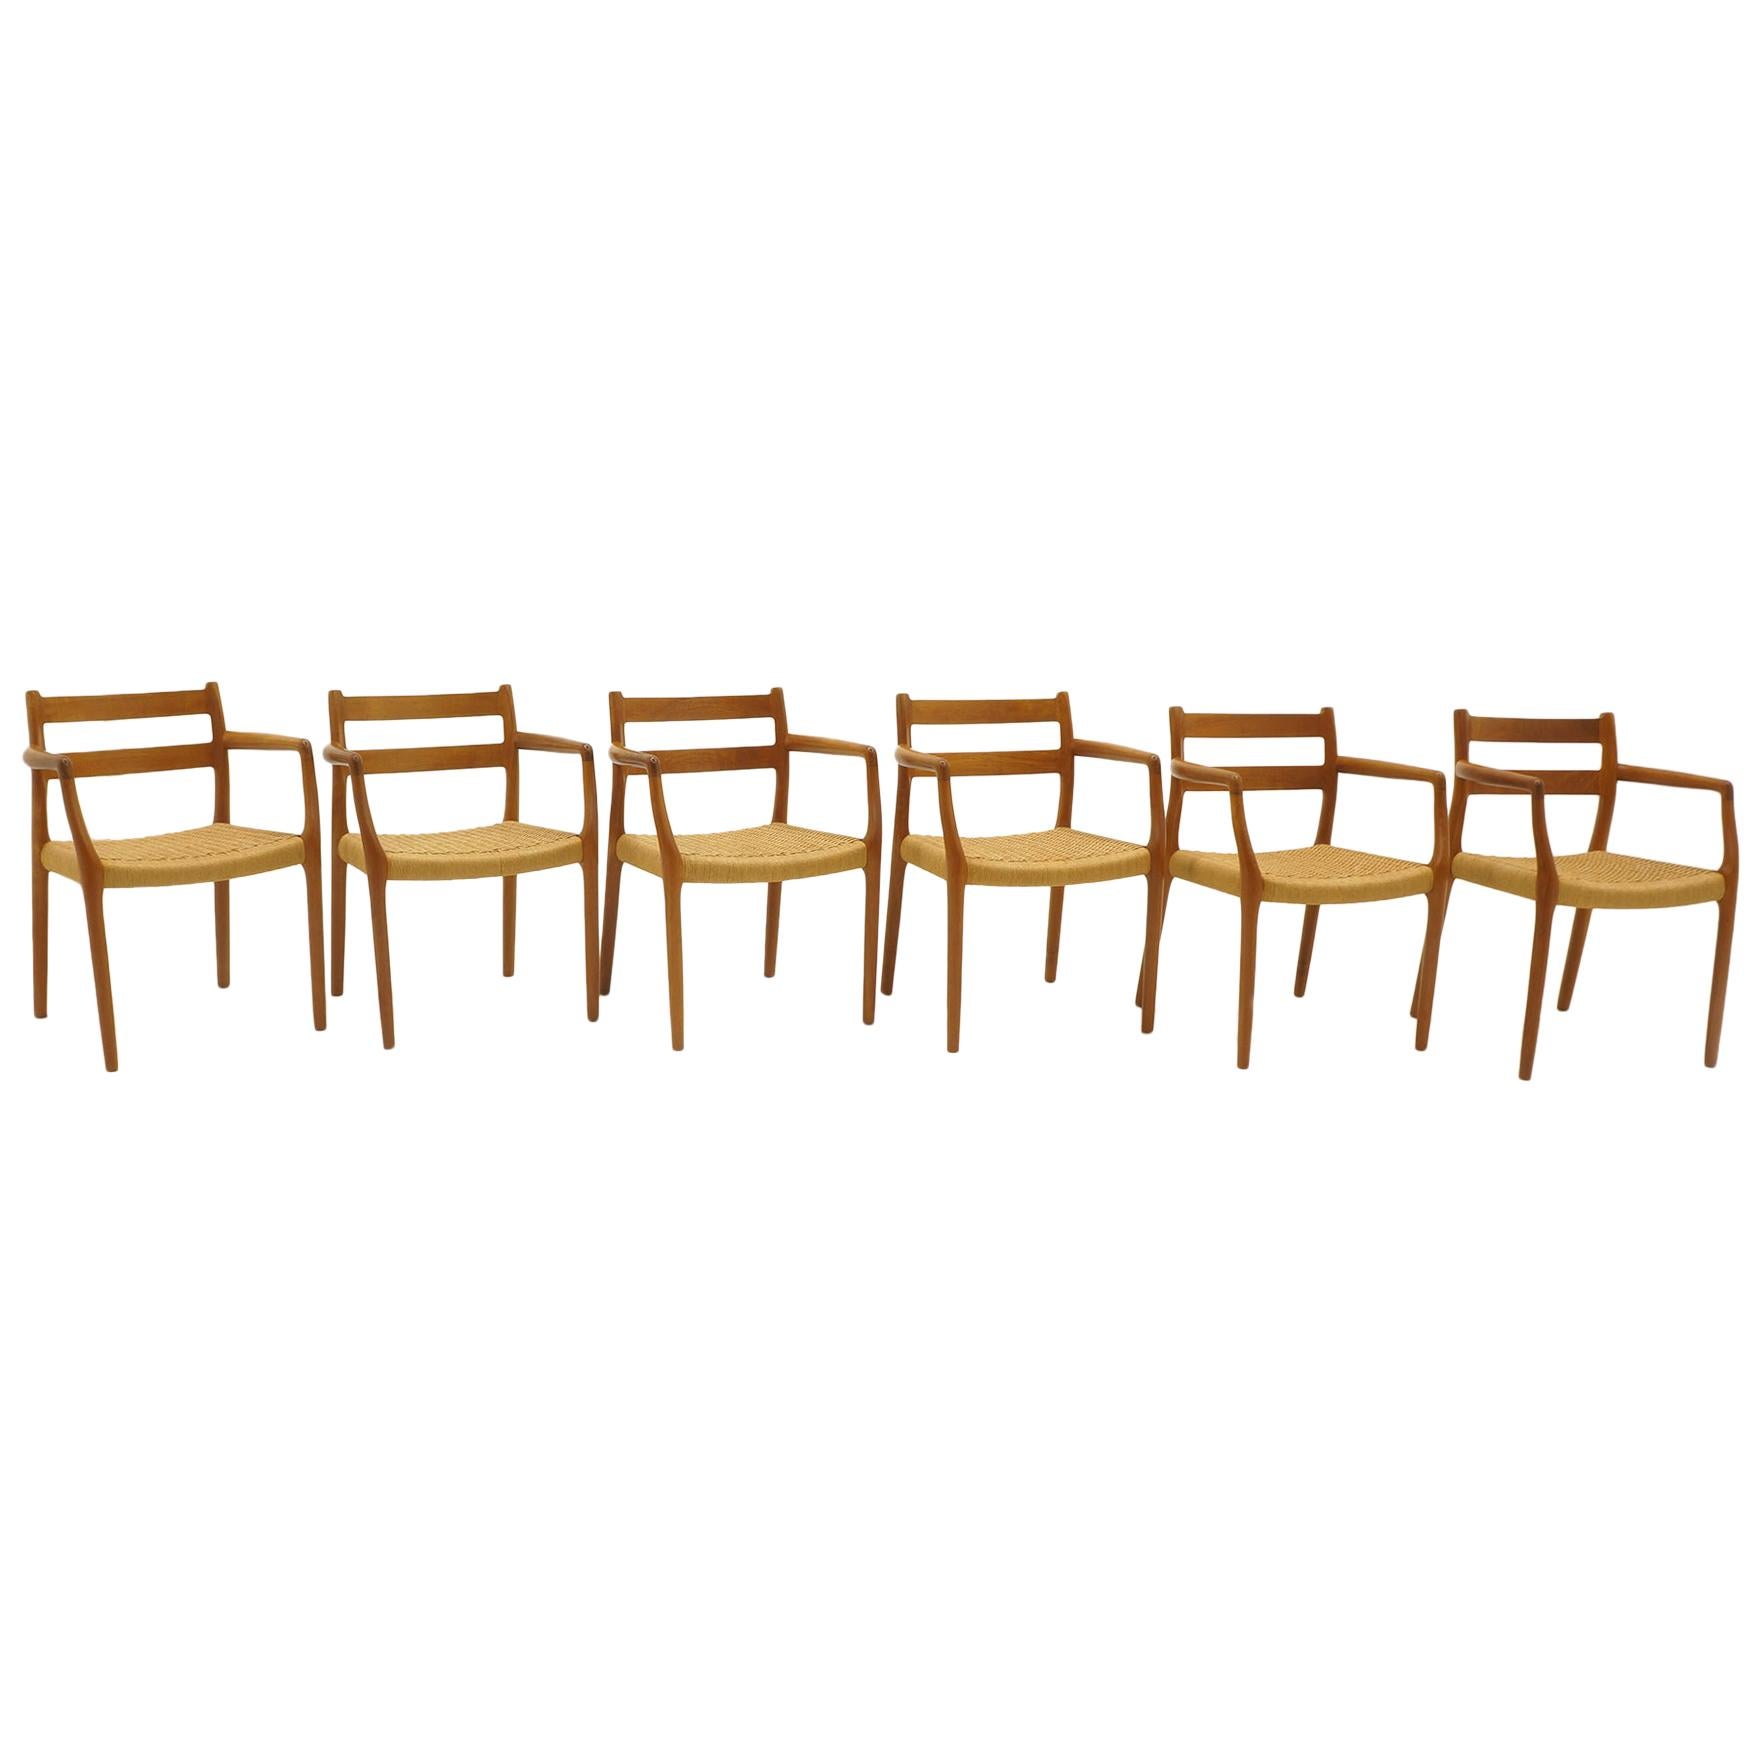 Set of Six Moller Dining Chairs, All Armchairs, Teak and Paper Cord Seats